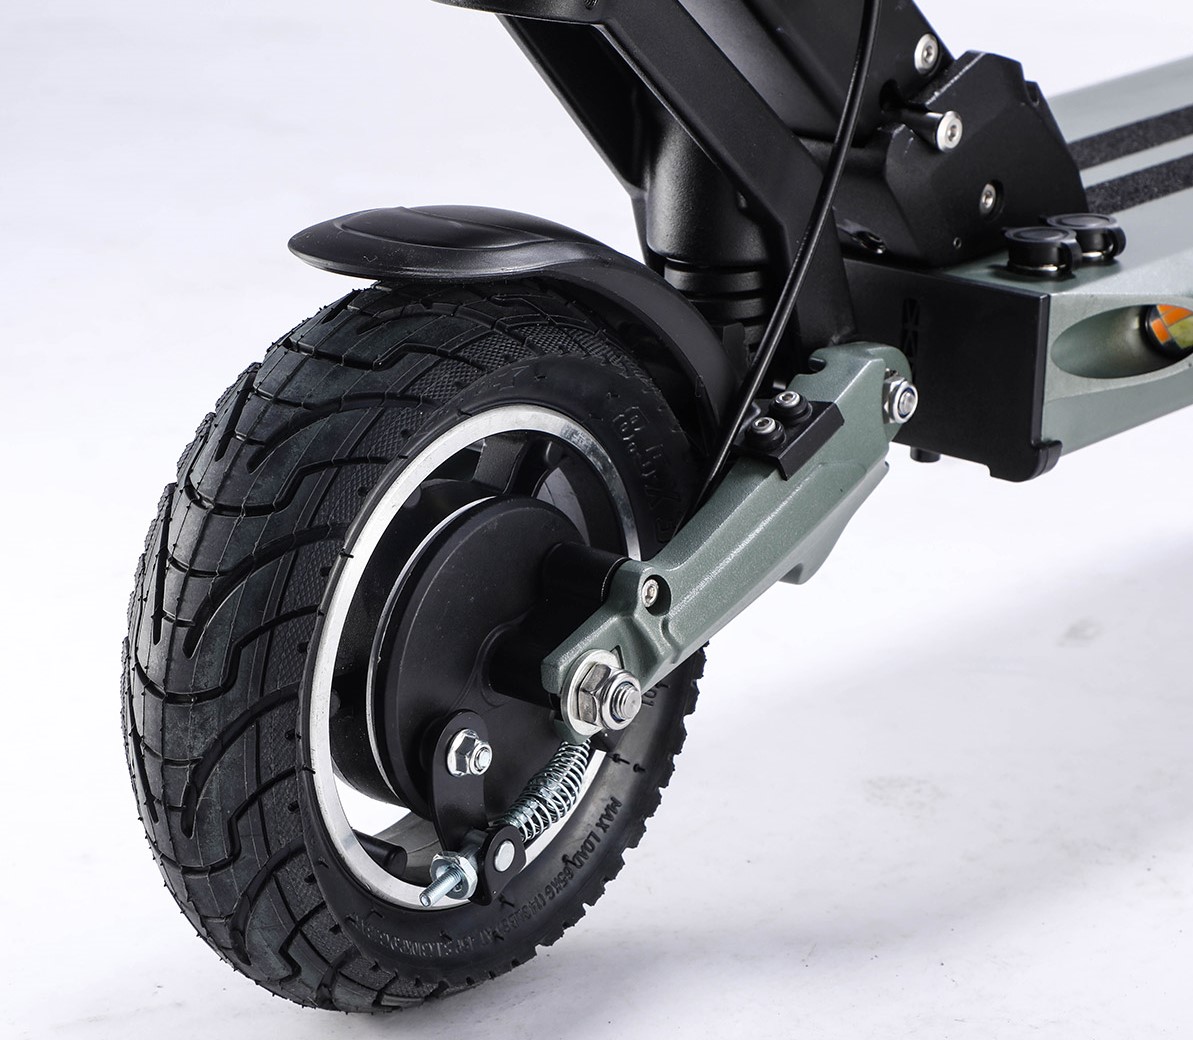 Vsett 8 electric scooter tyres 